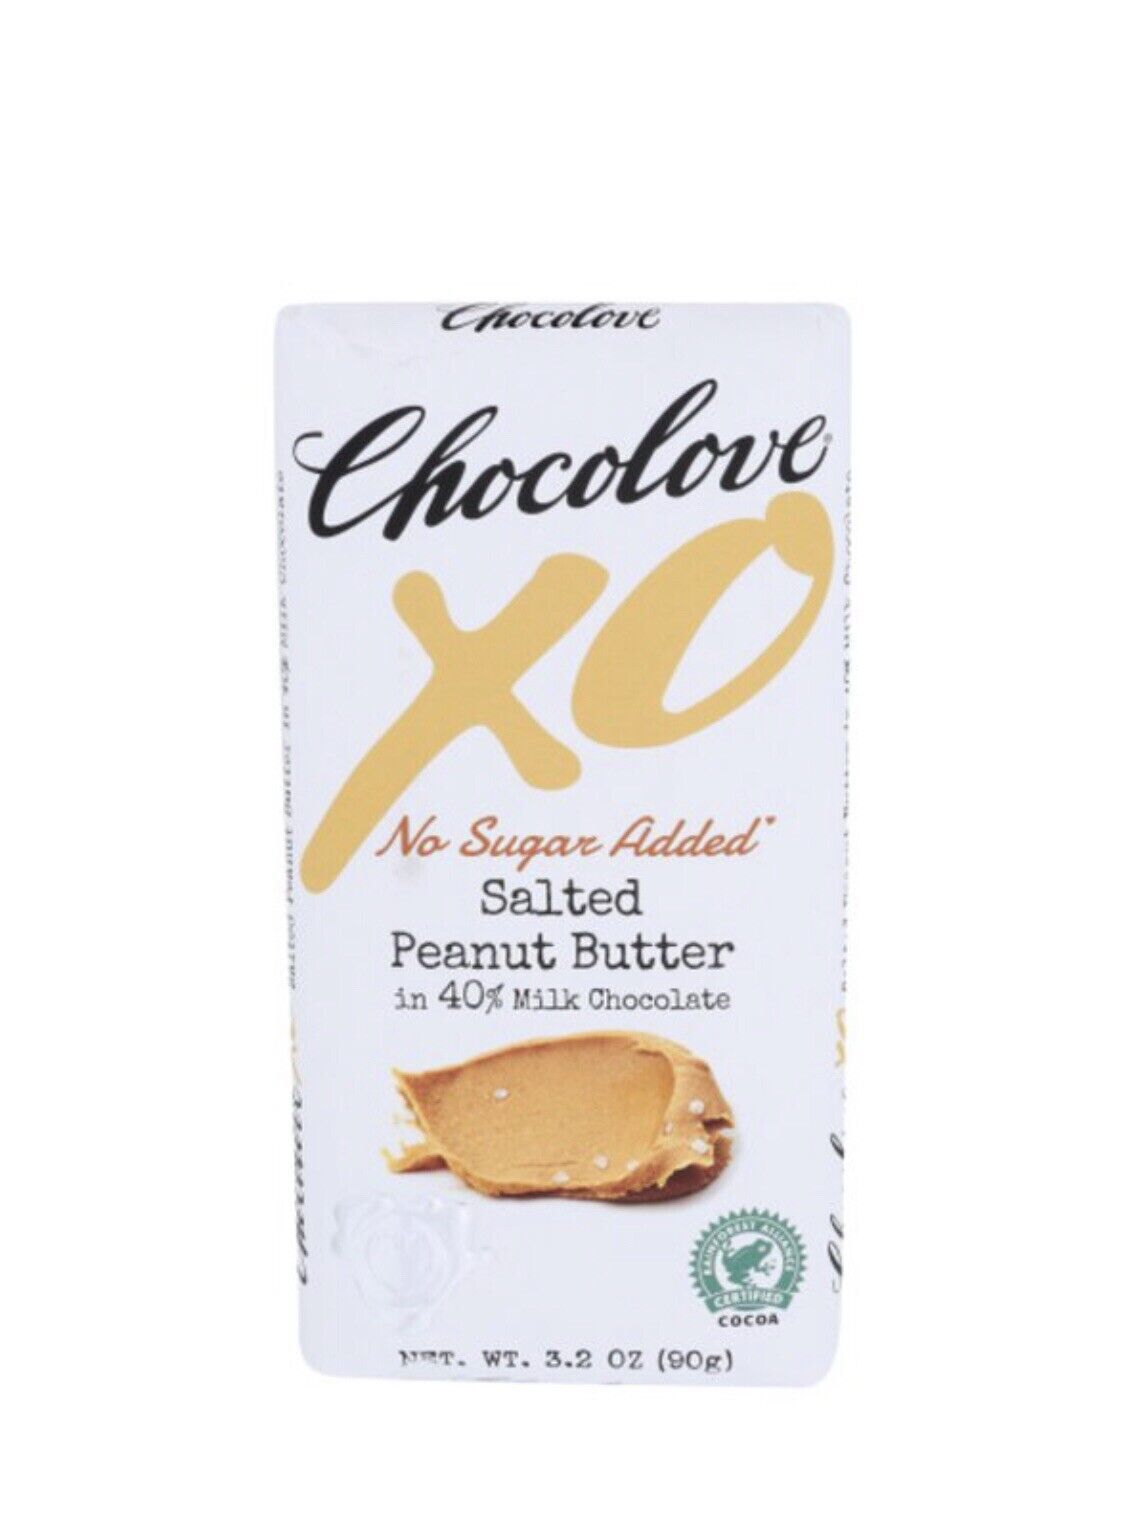 Chocolove XO Salted Peanut Butter Style Bar - No Sugar Added 3 oz . Pack of 4